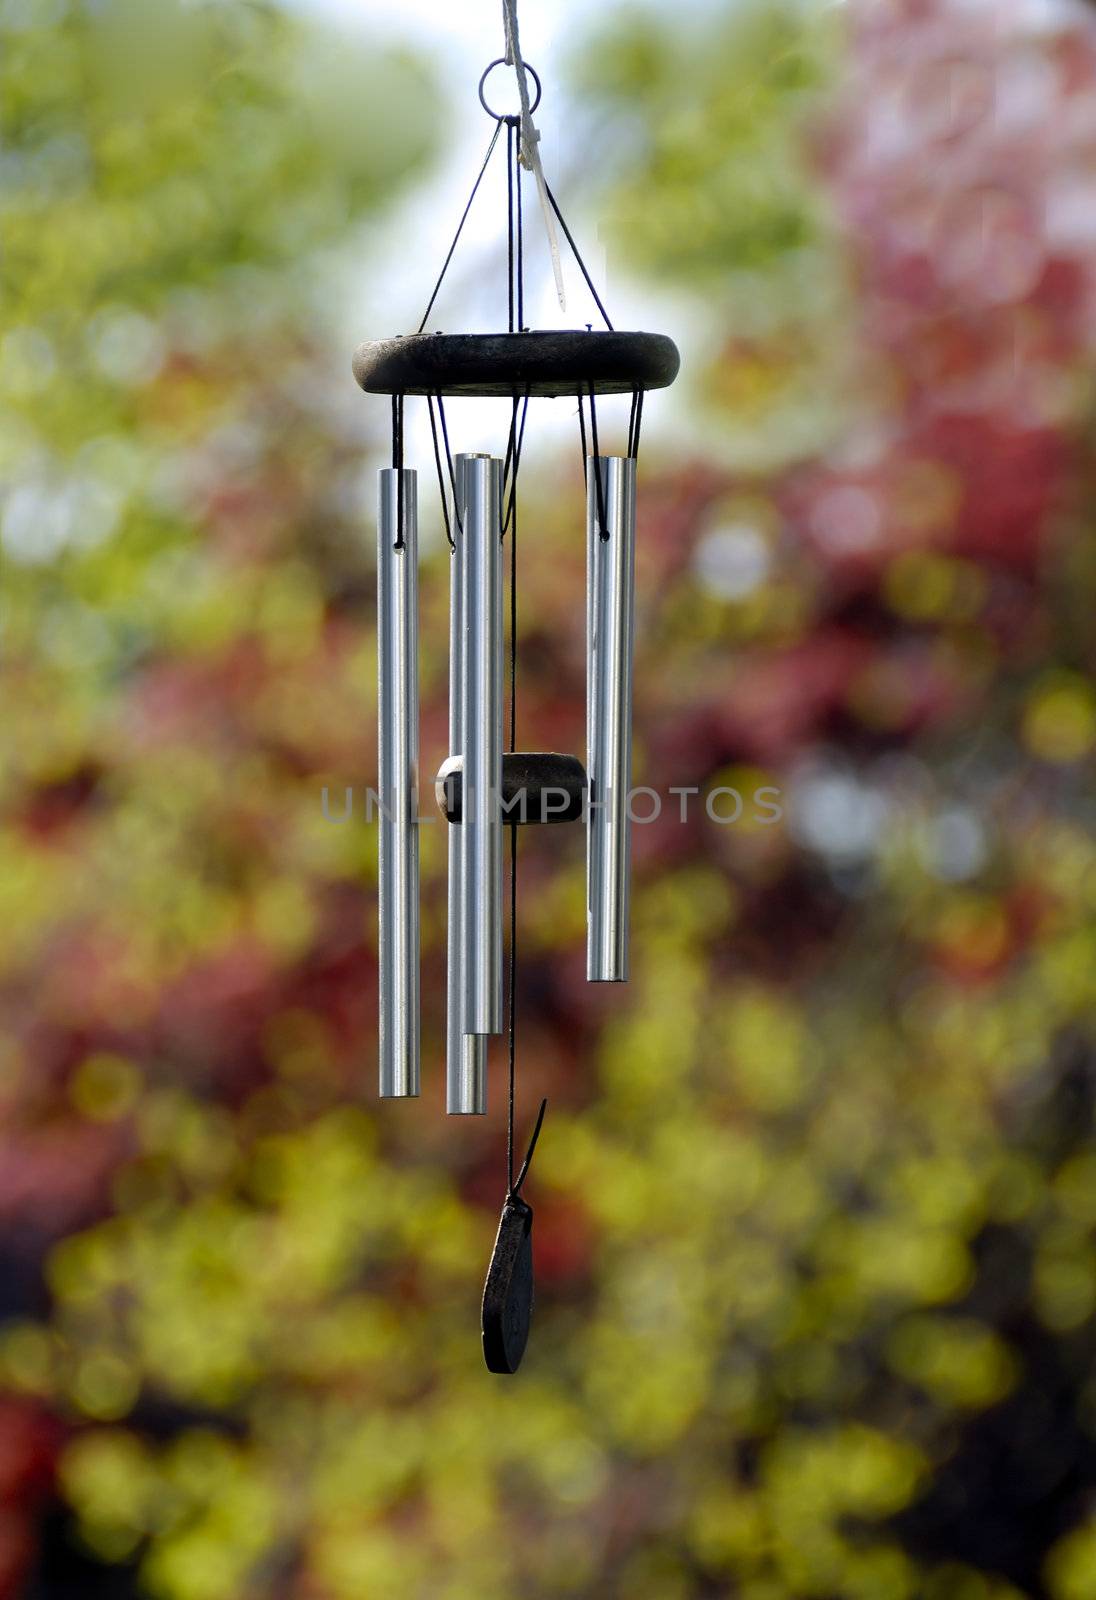 A metal wind chimes against a nature back ground